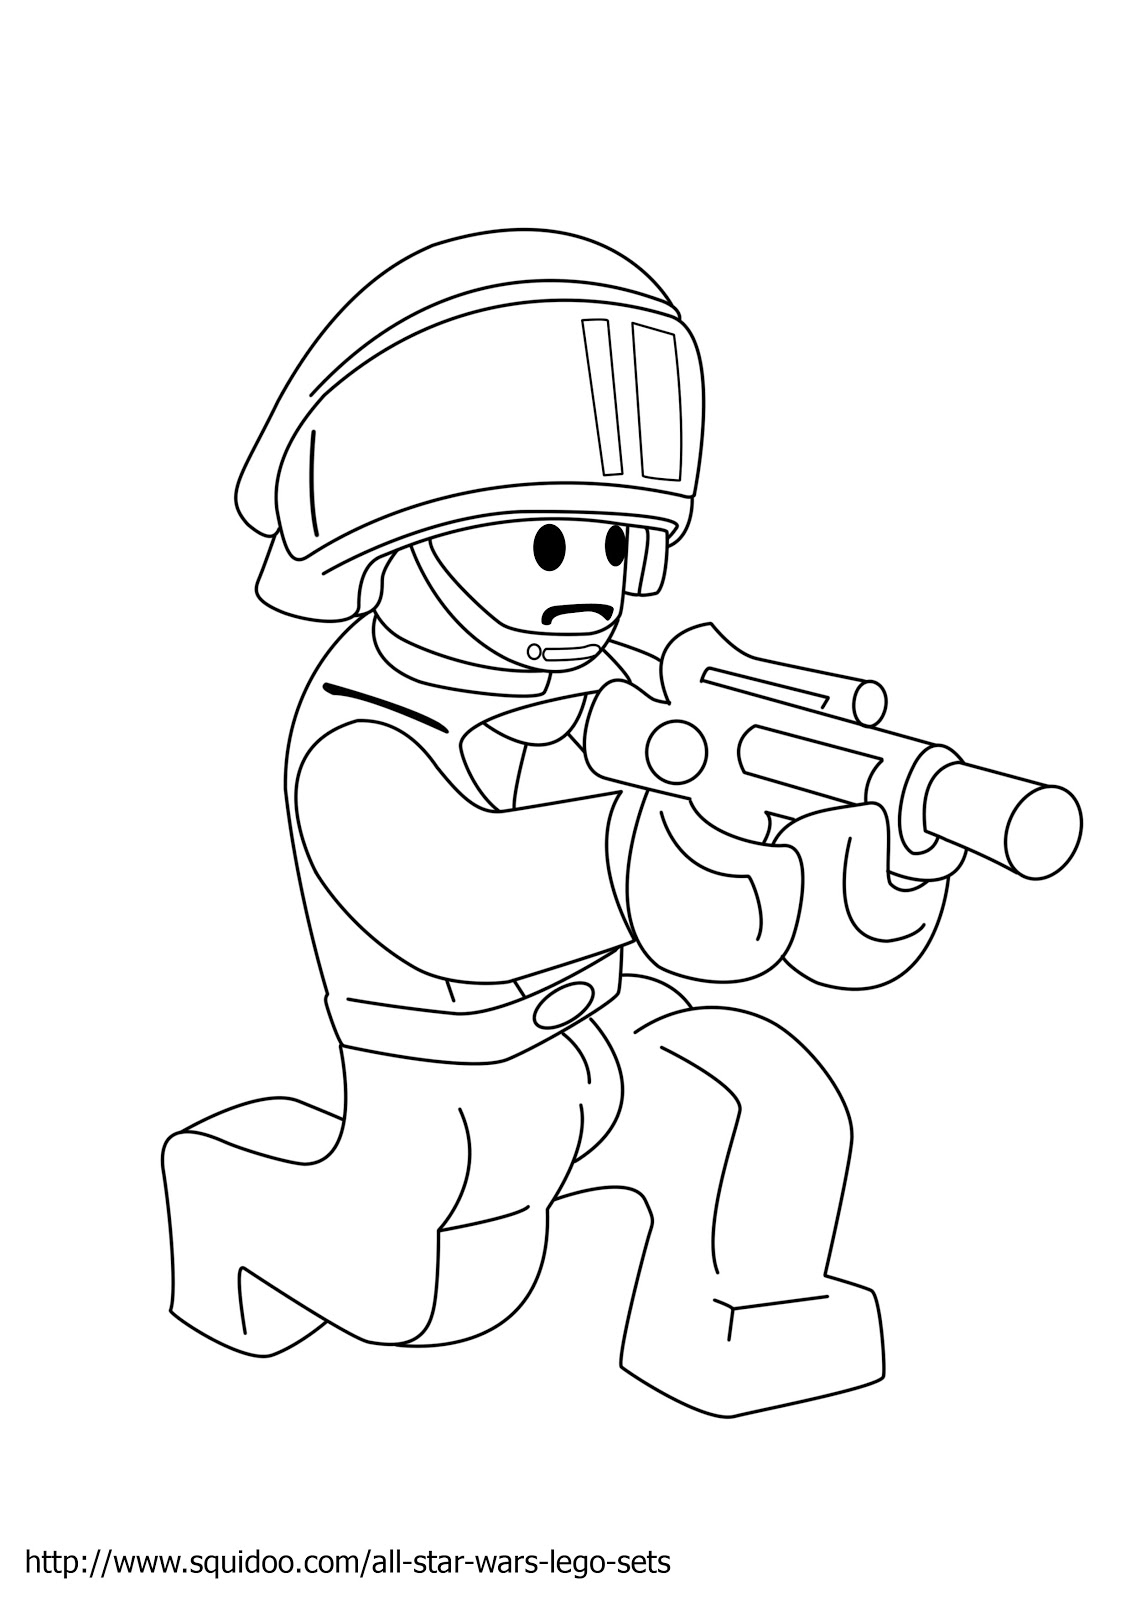  Lego Star Wars coloring pages | coloring pages for boys | #12